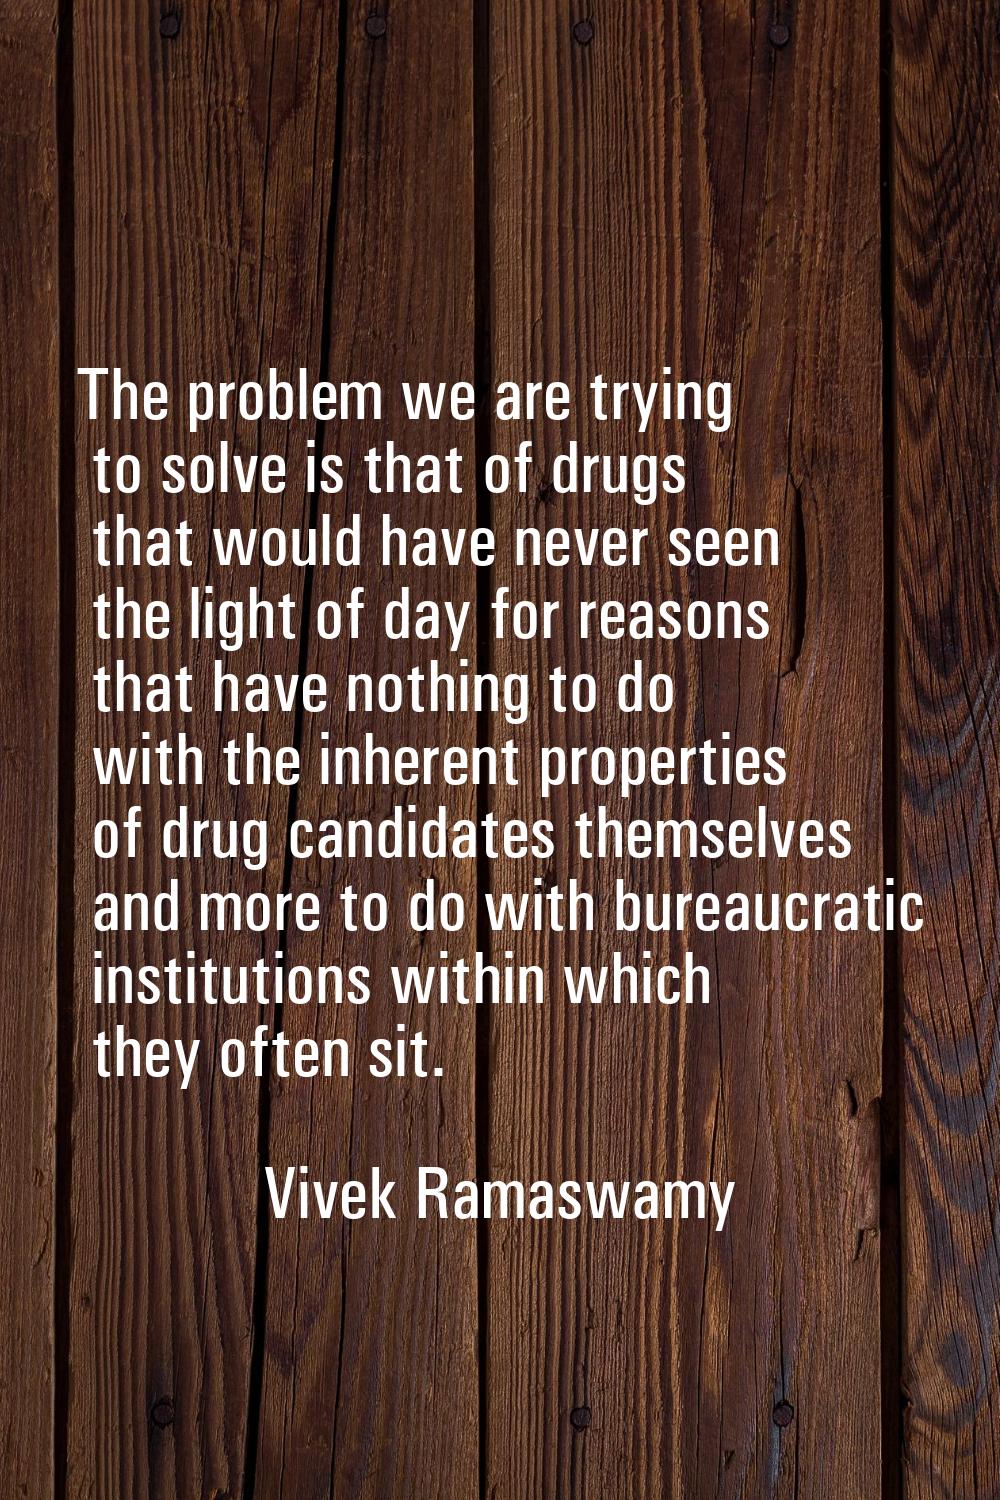 The problem we are trying to solve is that of drugs that would have never seen the light of day for